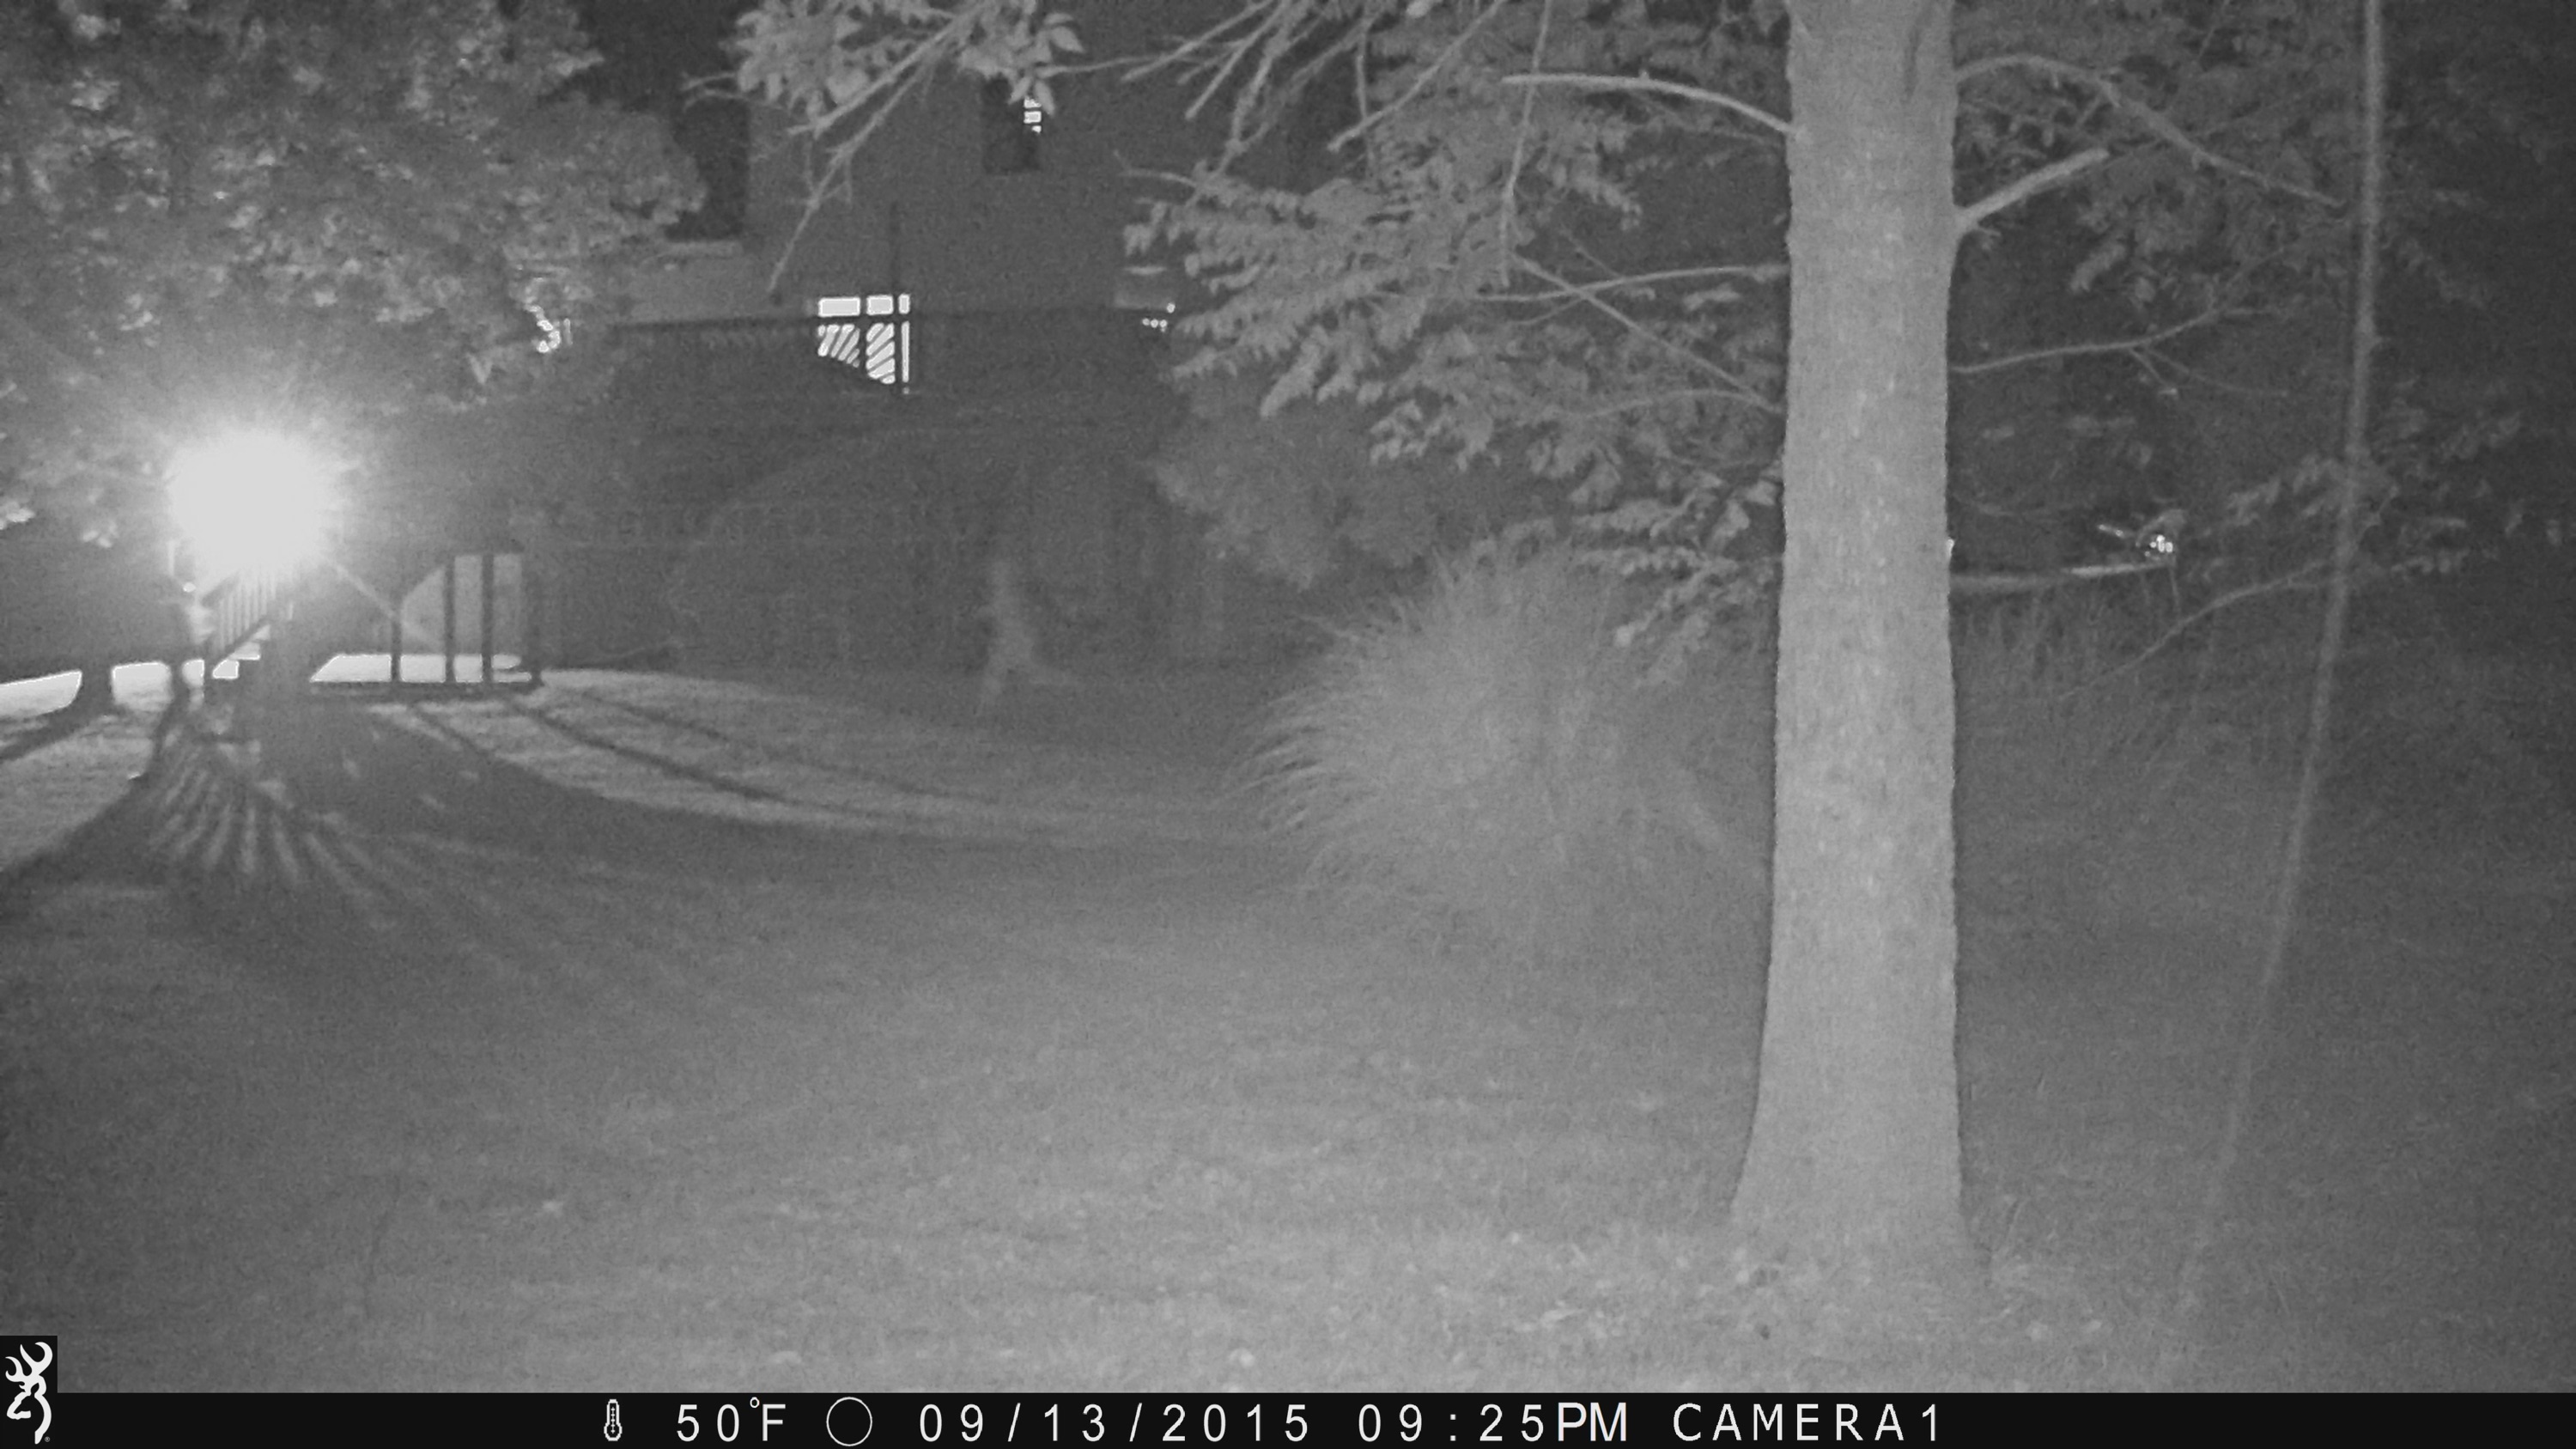 A neighbor’s son set up a trap camera in their backyard to see if he would catch anything cool, he got this instead